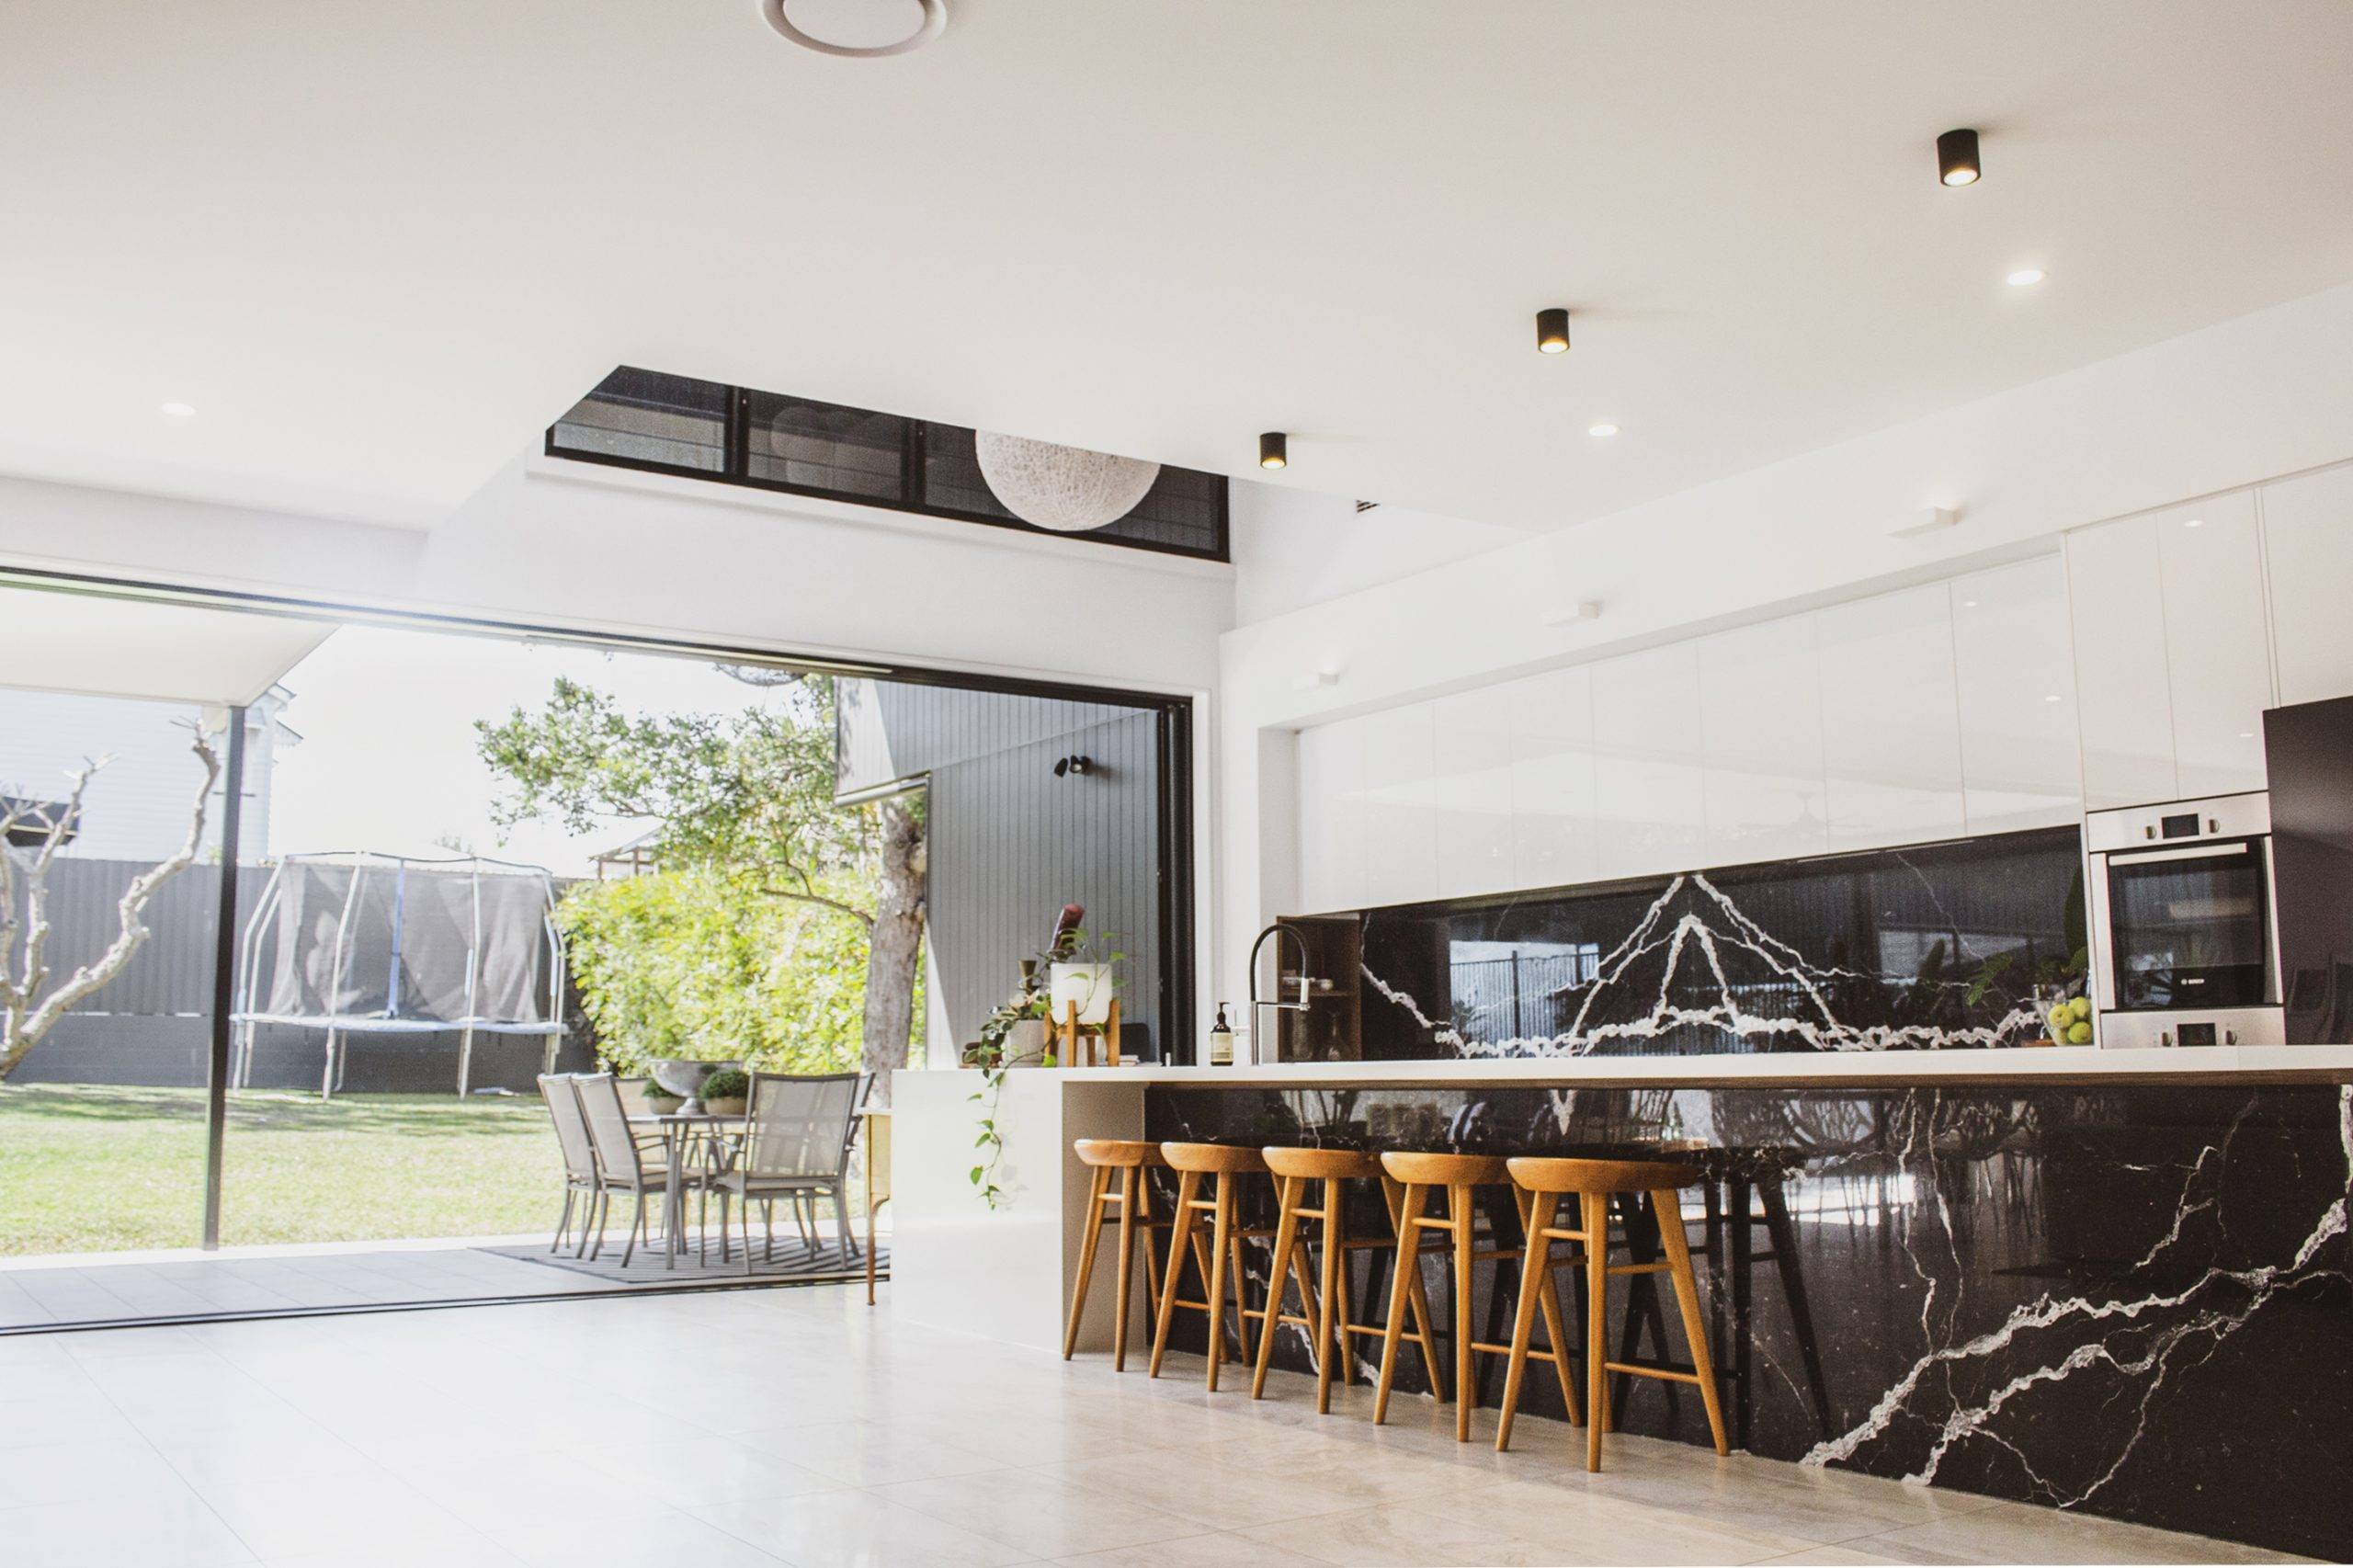 Architect designed minimalist, modern home, Minimalist palette of white, black, stained timber, and terrazzo tiles, Traditional Character Area, traditional Queenslander style